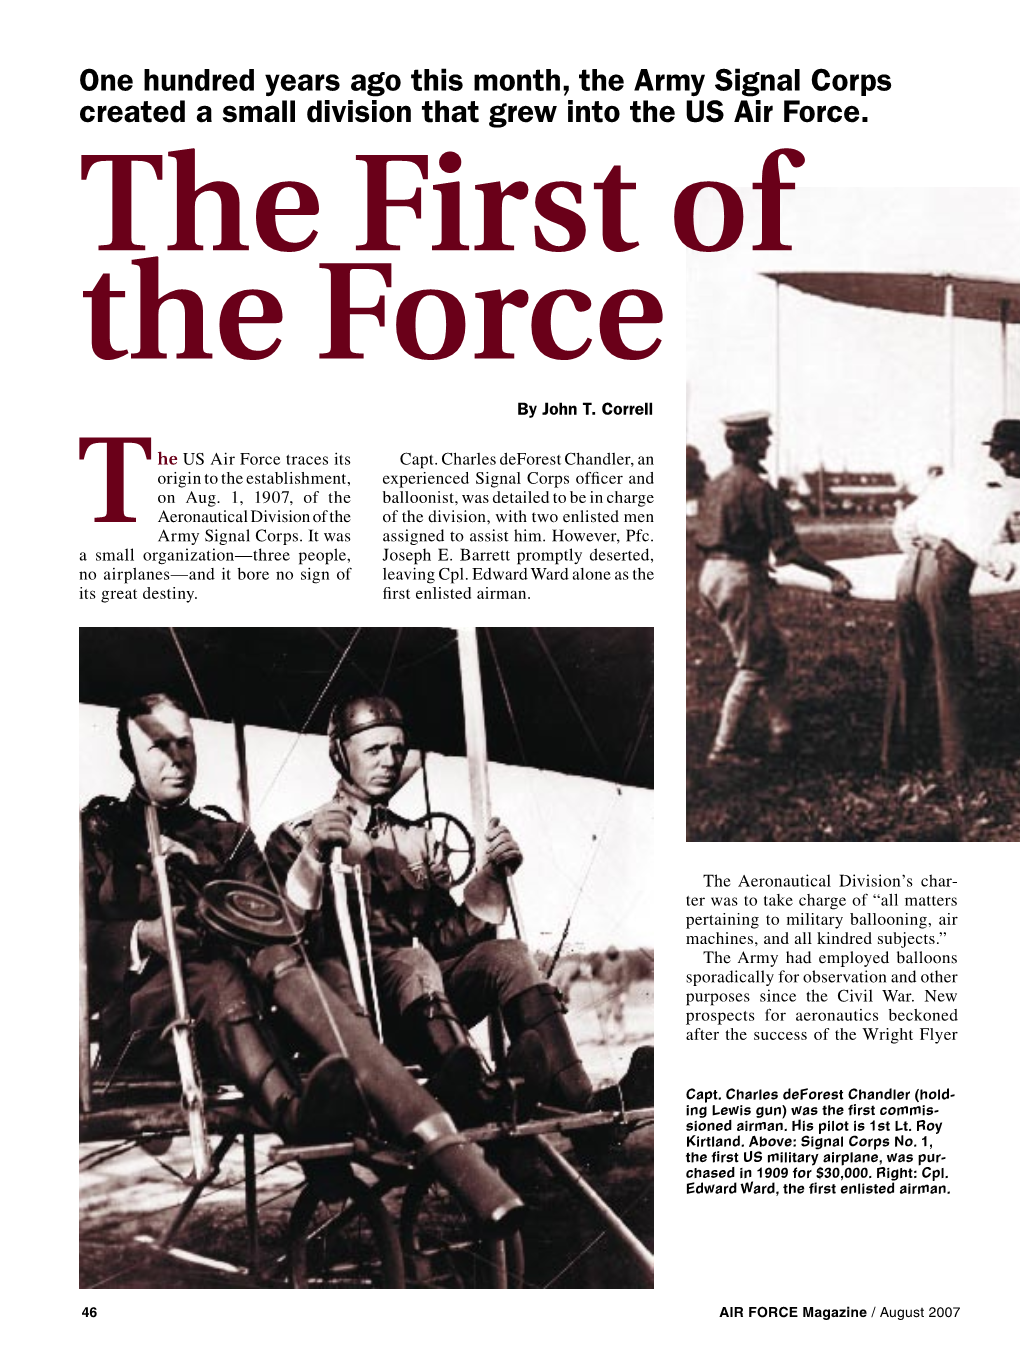 One Hundred Years Ago This Month, the Army Signal Corps Created a Small Division That Grew Into the US Air Force